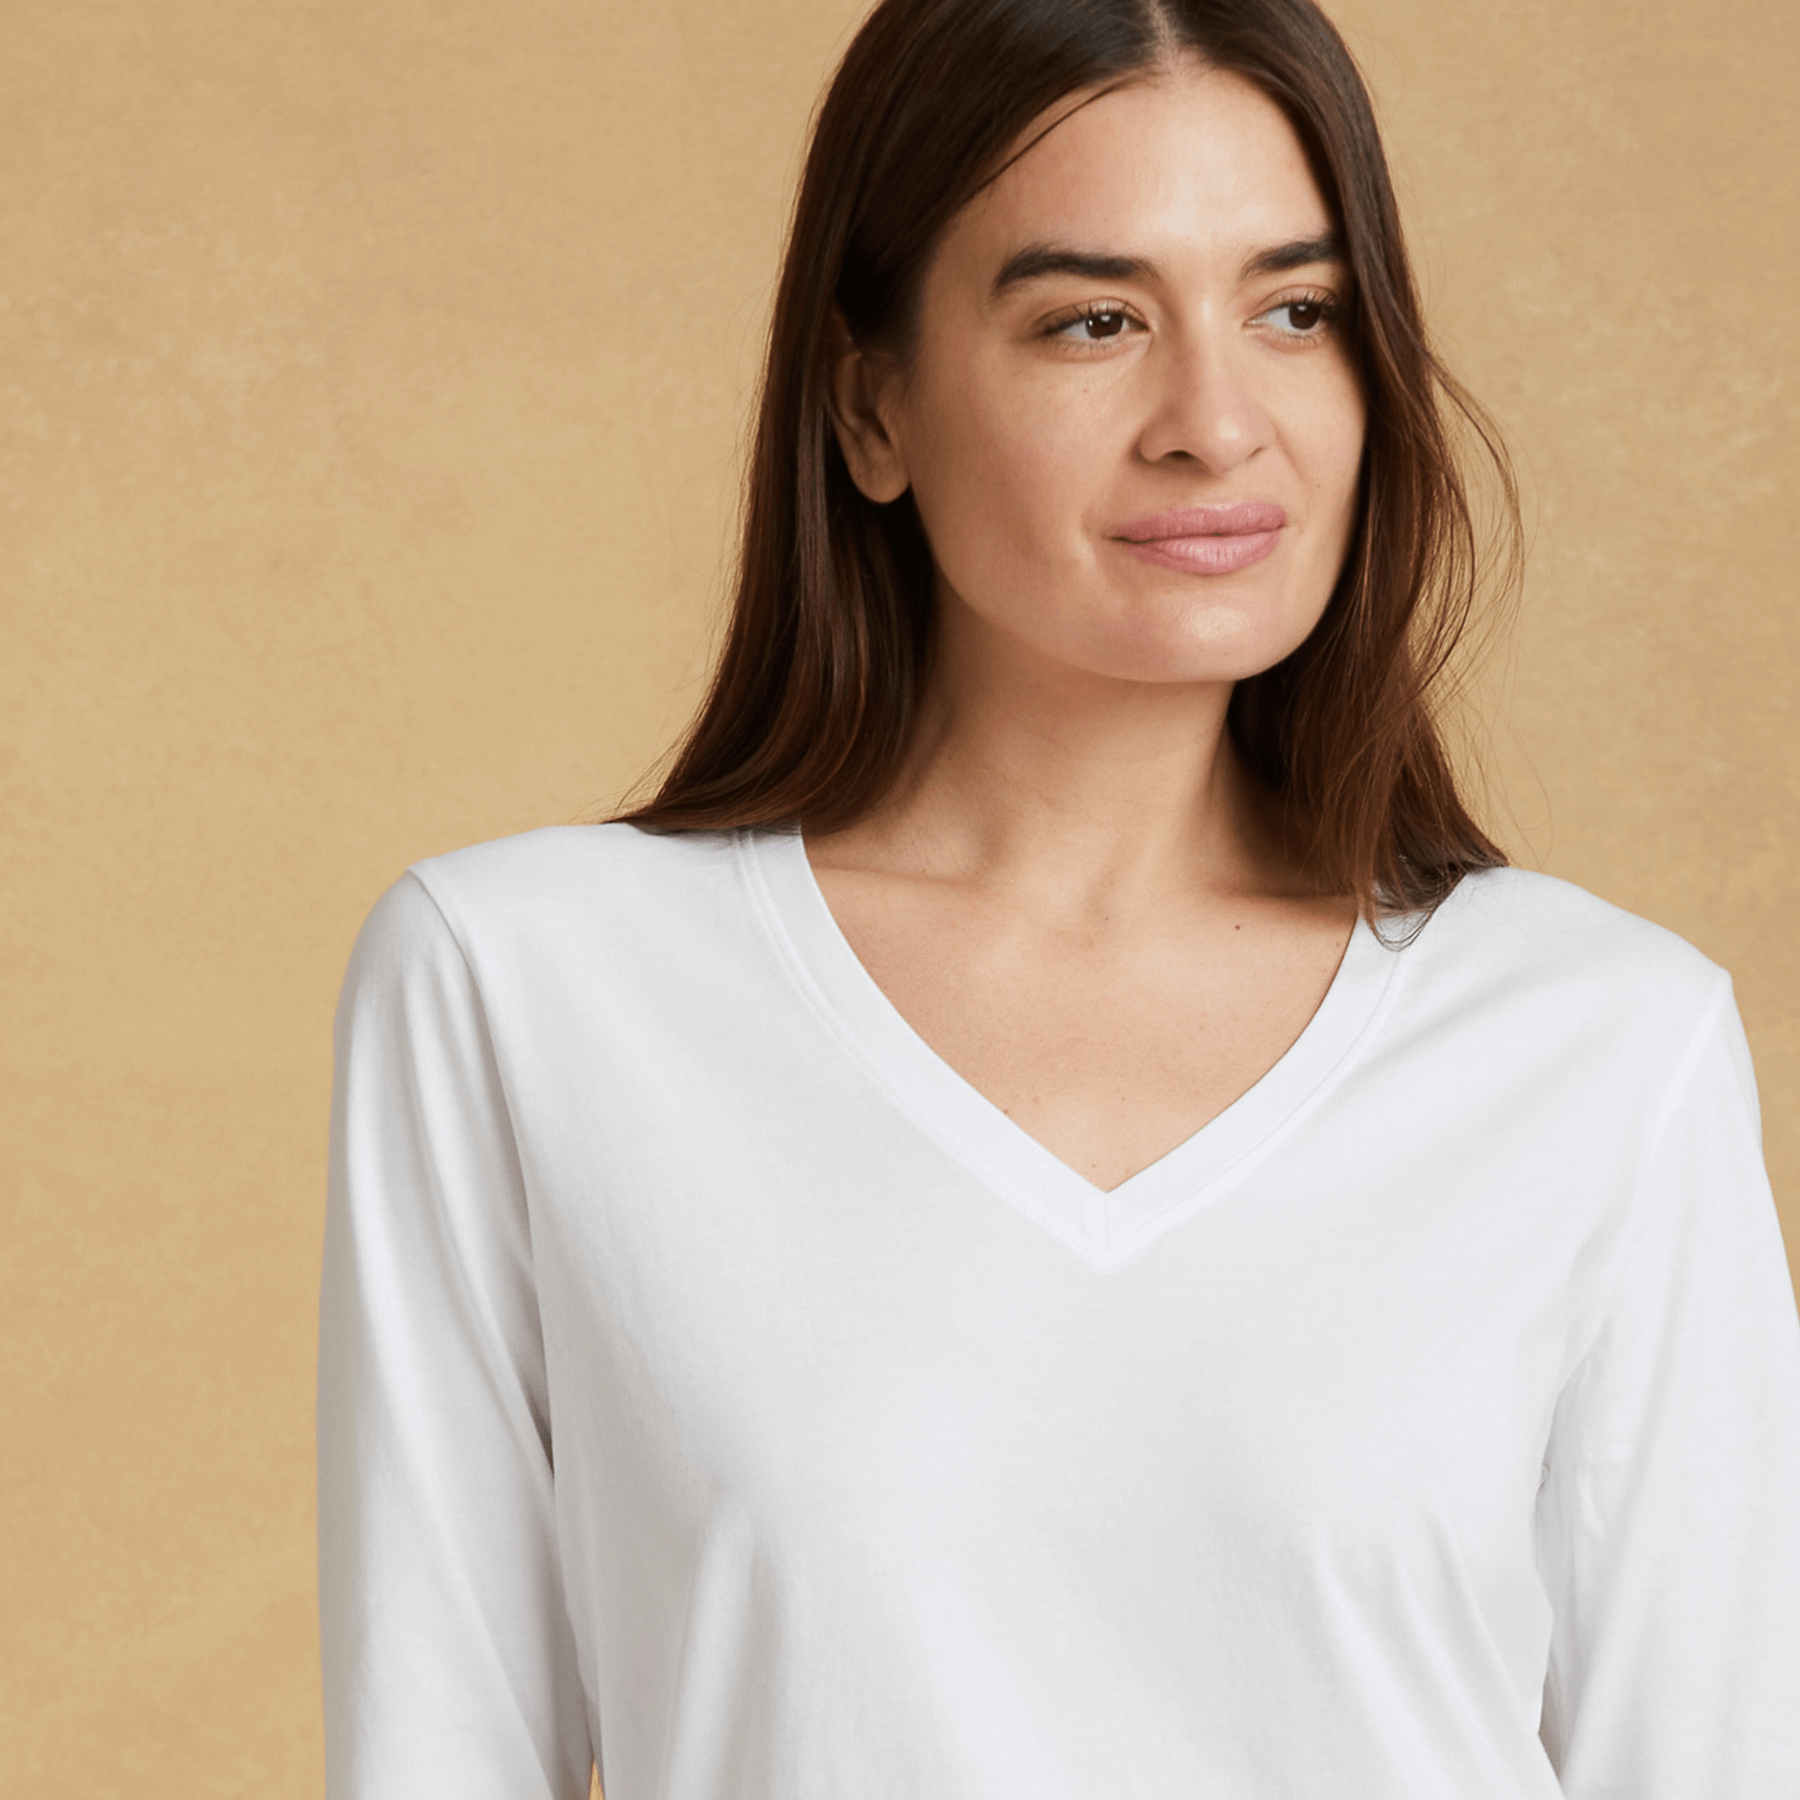 THE BLAZZE 1099 Women's Cotton Basic Sexy Solid V Neck Slim Fit